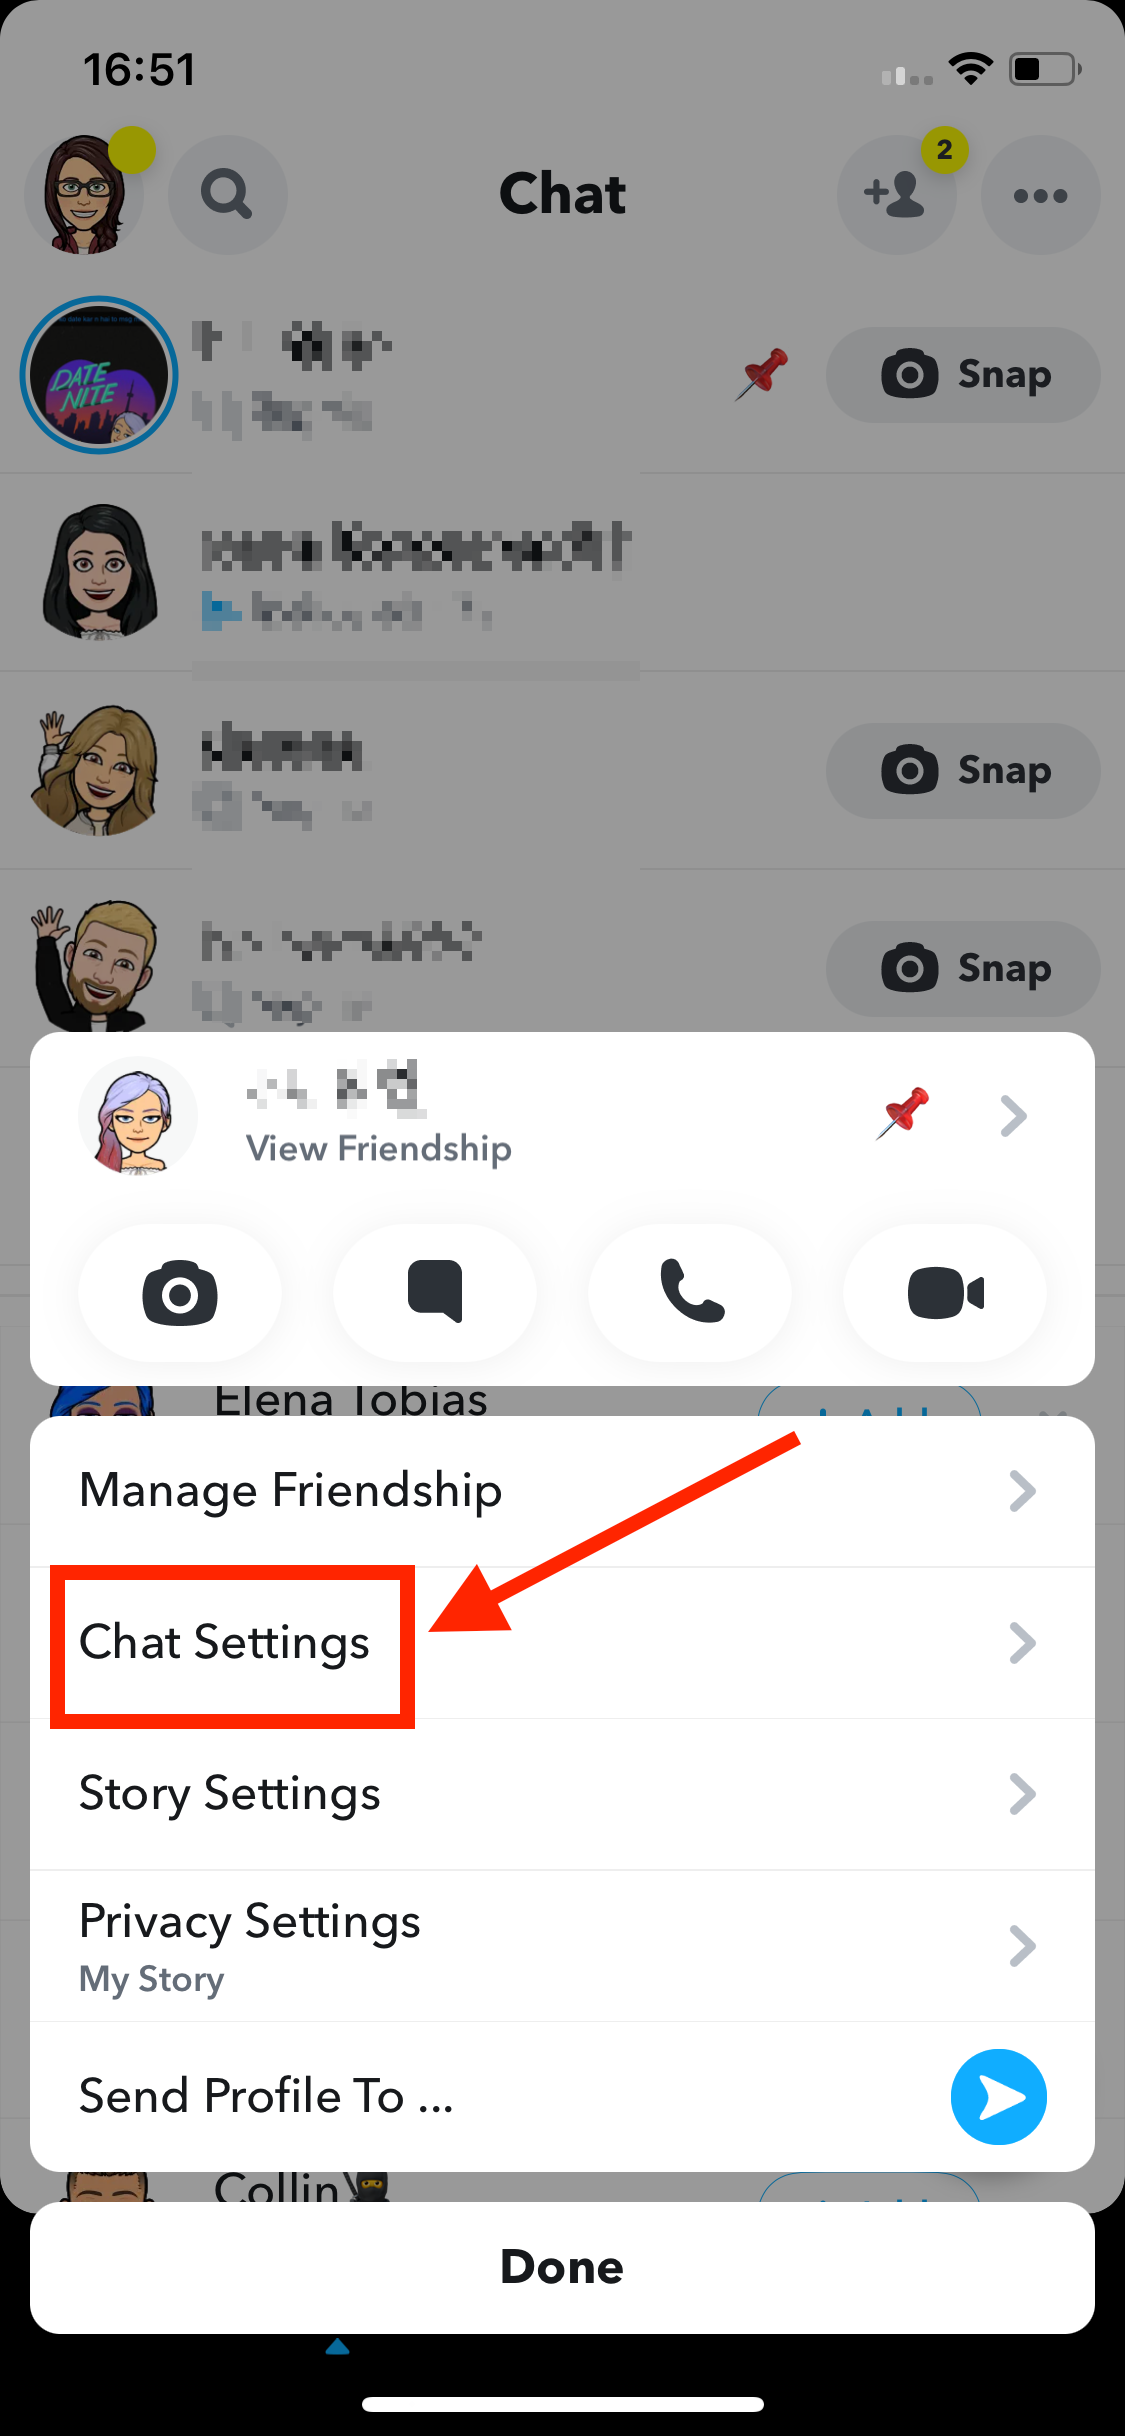 Long press on pinned chat and tap on 'Chat Settings'